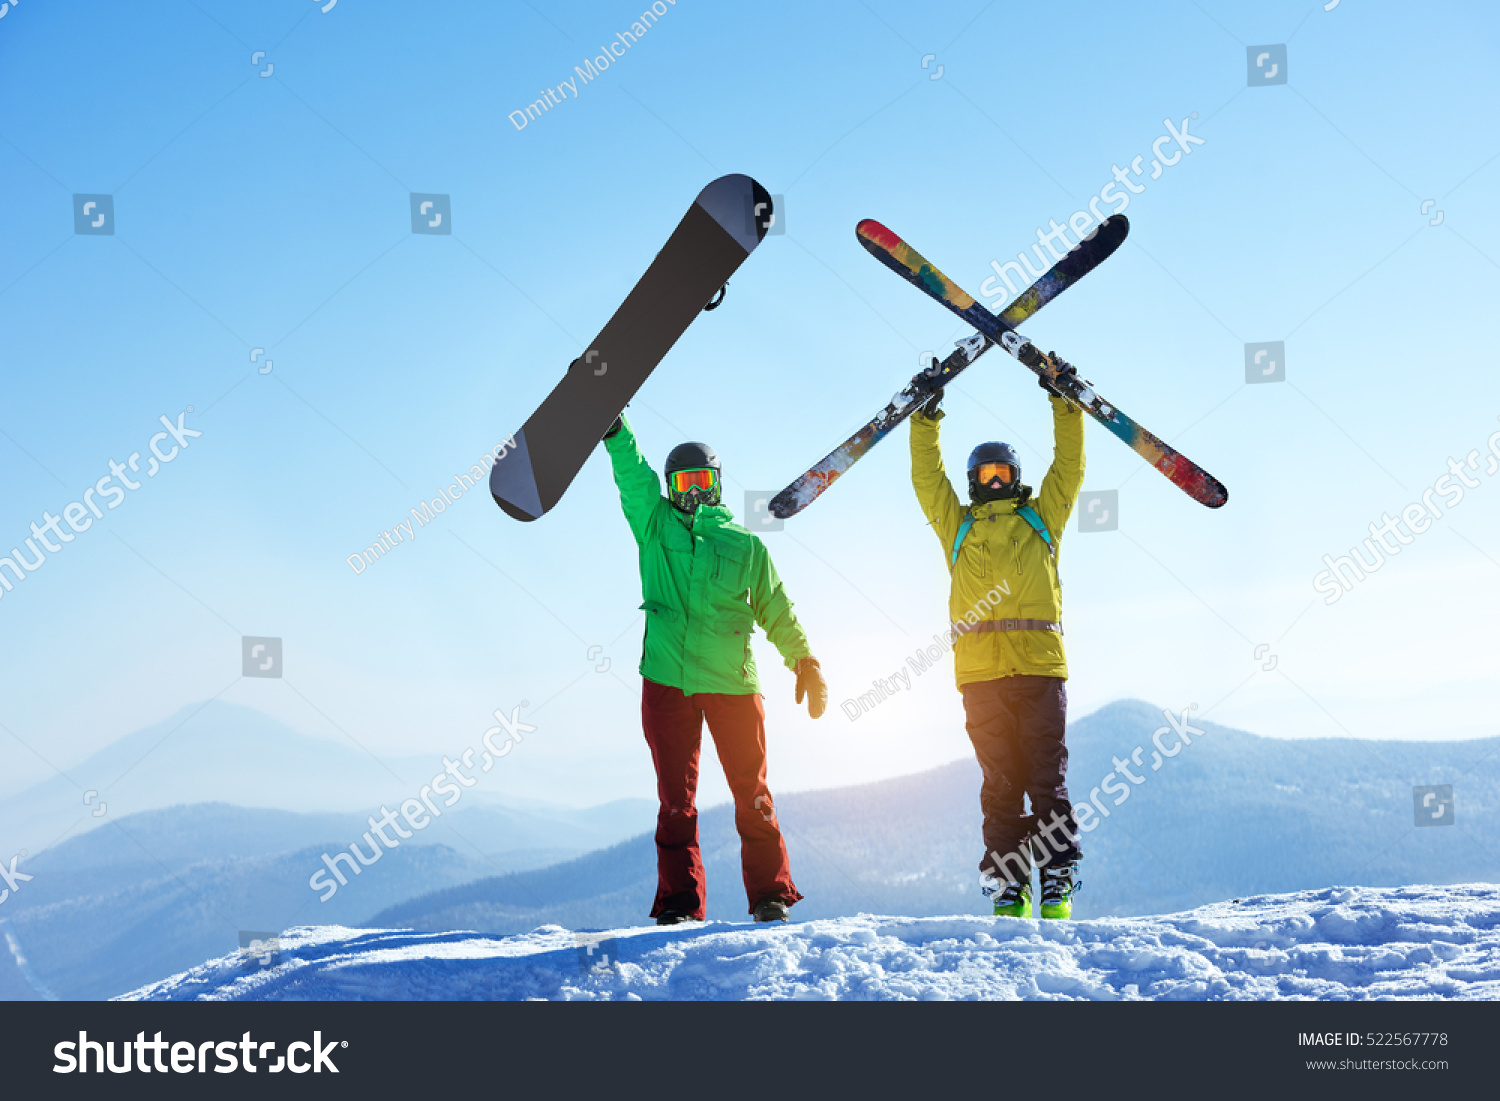 Skier and snowboarder stands mountain top with ski and snowboard in hands. Skiing and snowboarding concept. Sheregesh ski resort #522567778